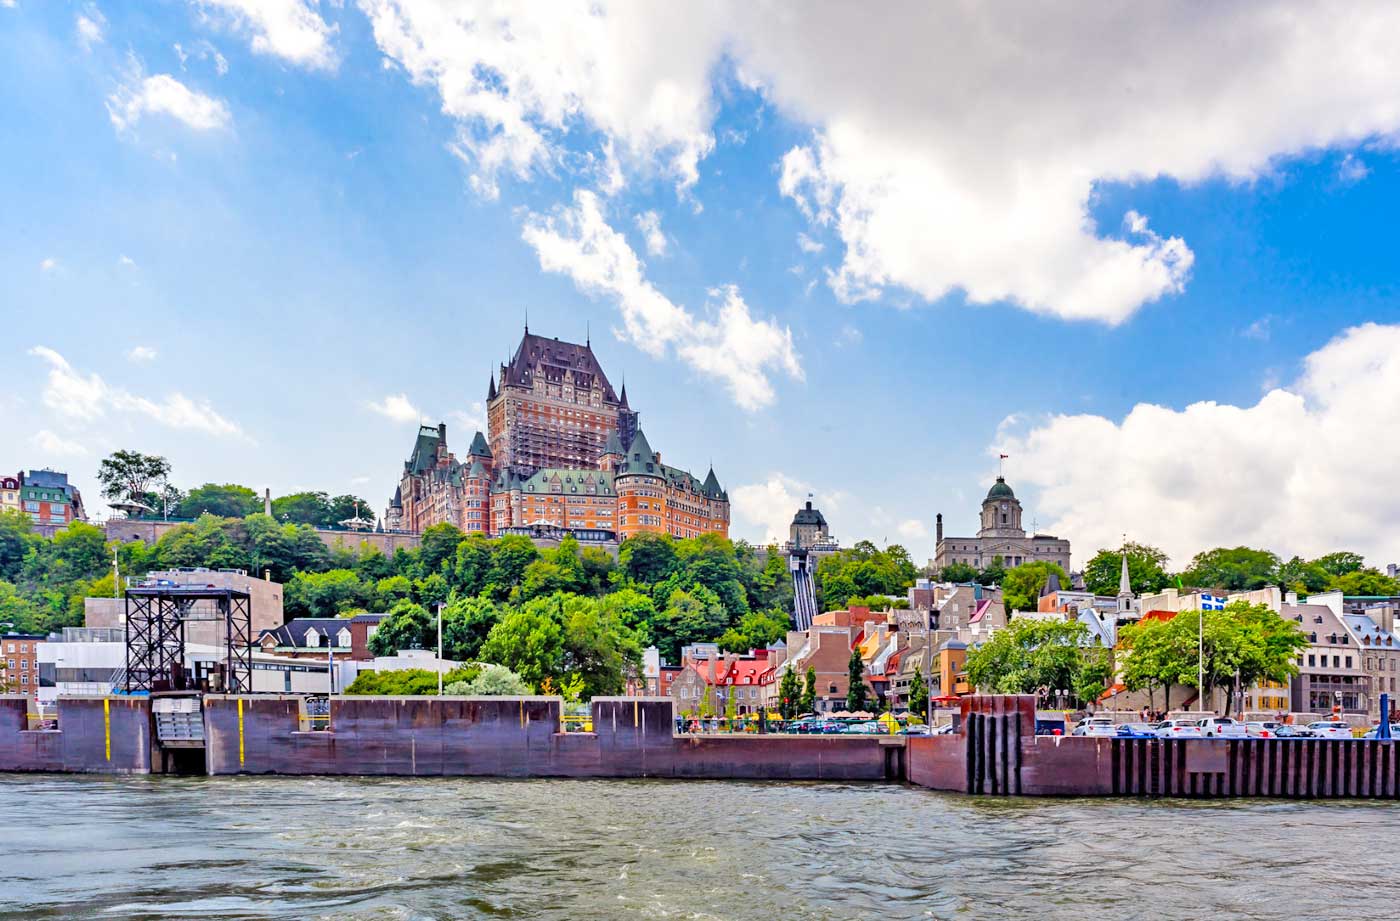 Quebec City View - Frontenac Castel and Royal Place